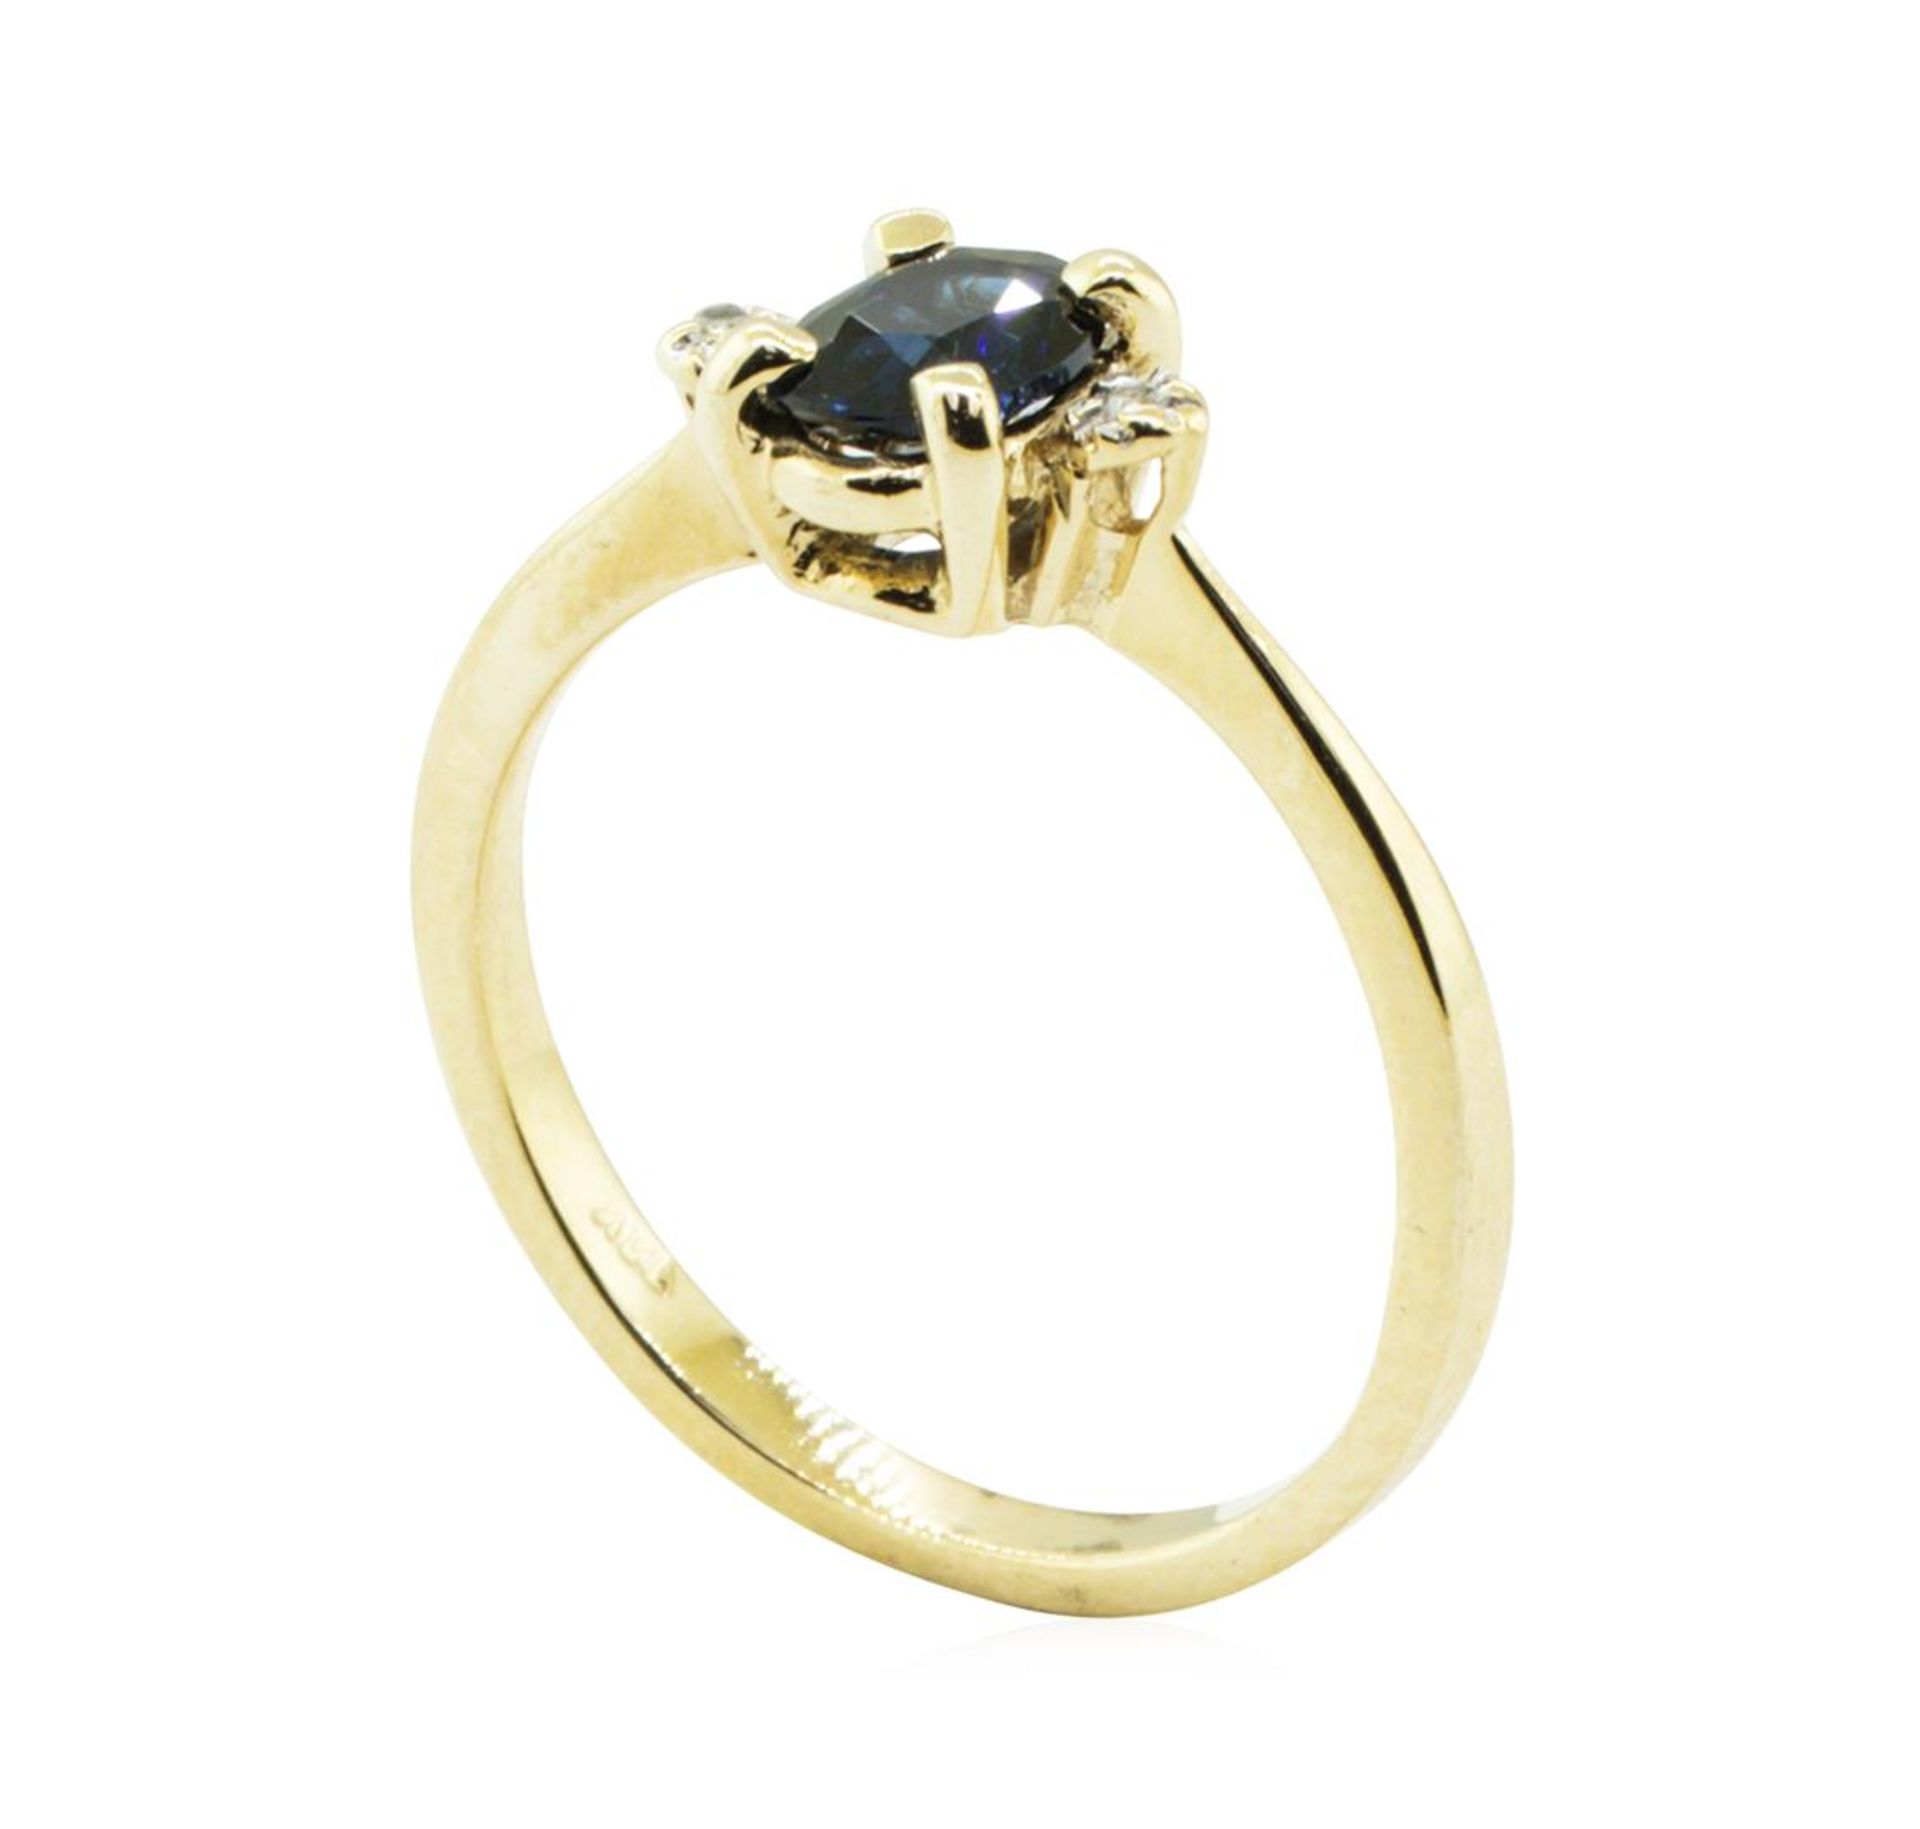 0.69 ctw Blue Sapphire and Diamond Ring - 14KT Yellow Gold - Image 4 of 4